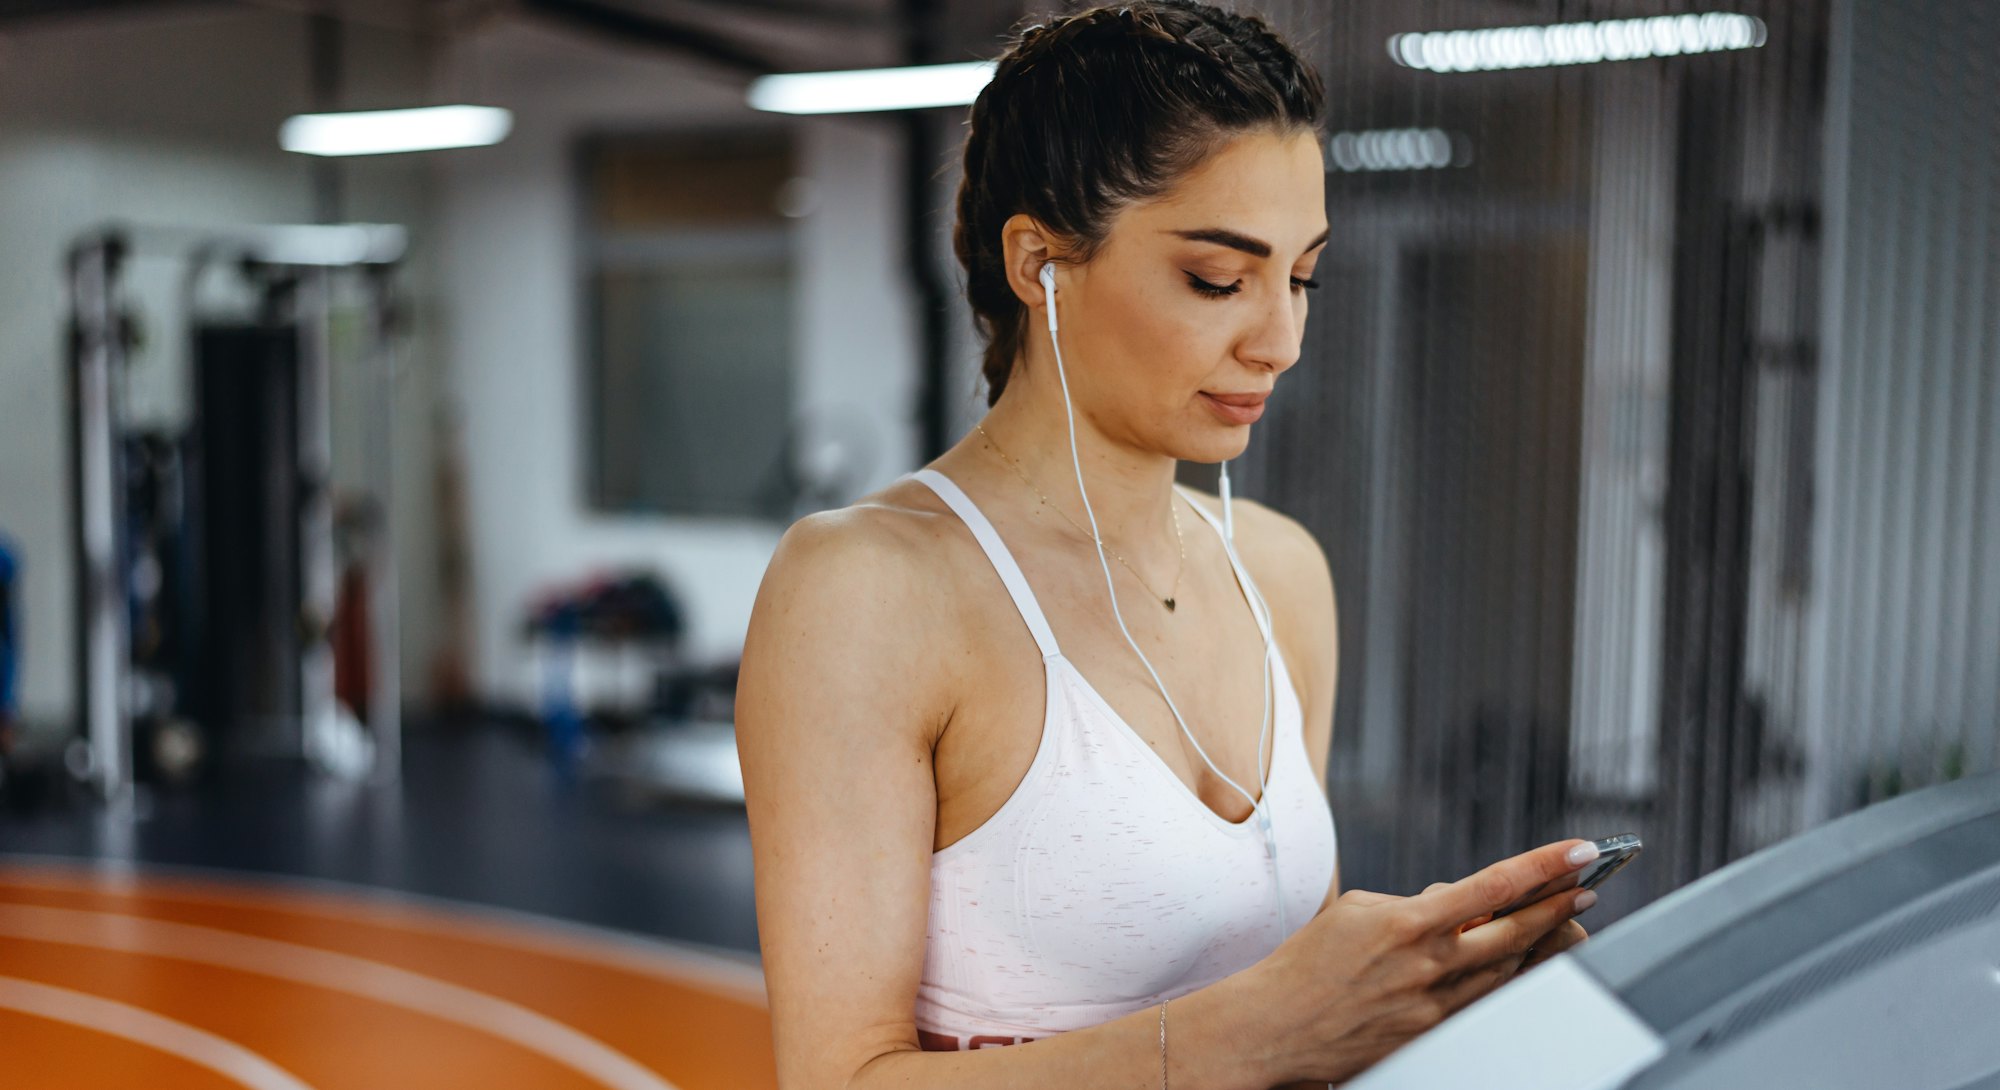 Young focused female working out at gym jogging on a treadmill. What are the benefits of tabata?